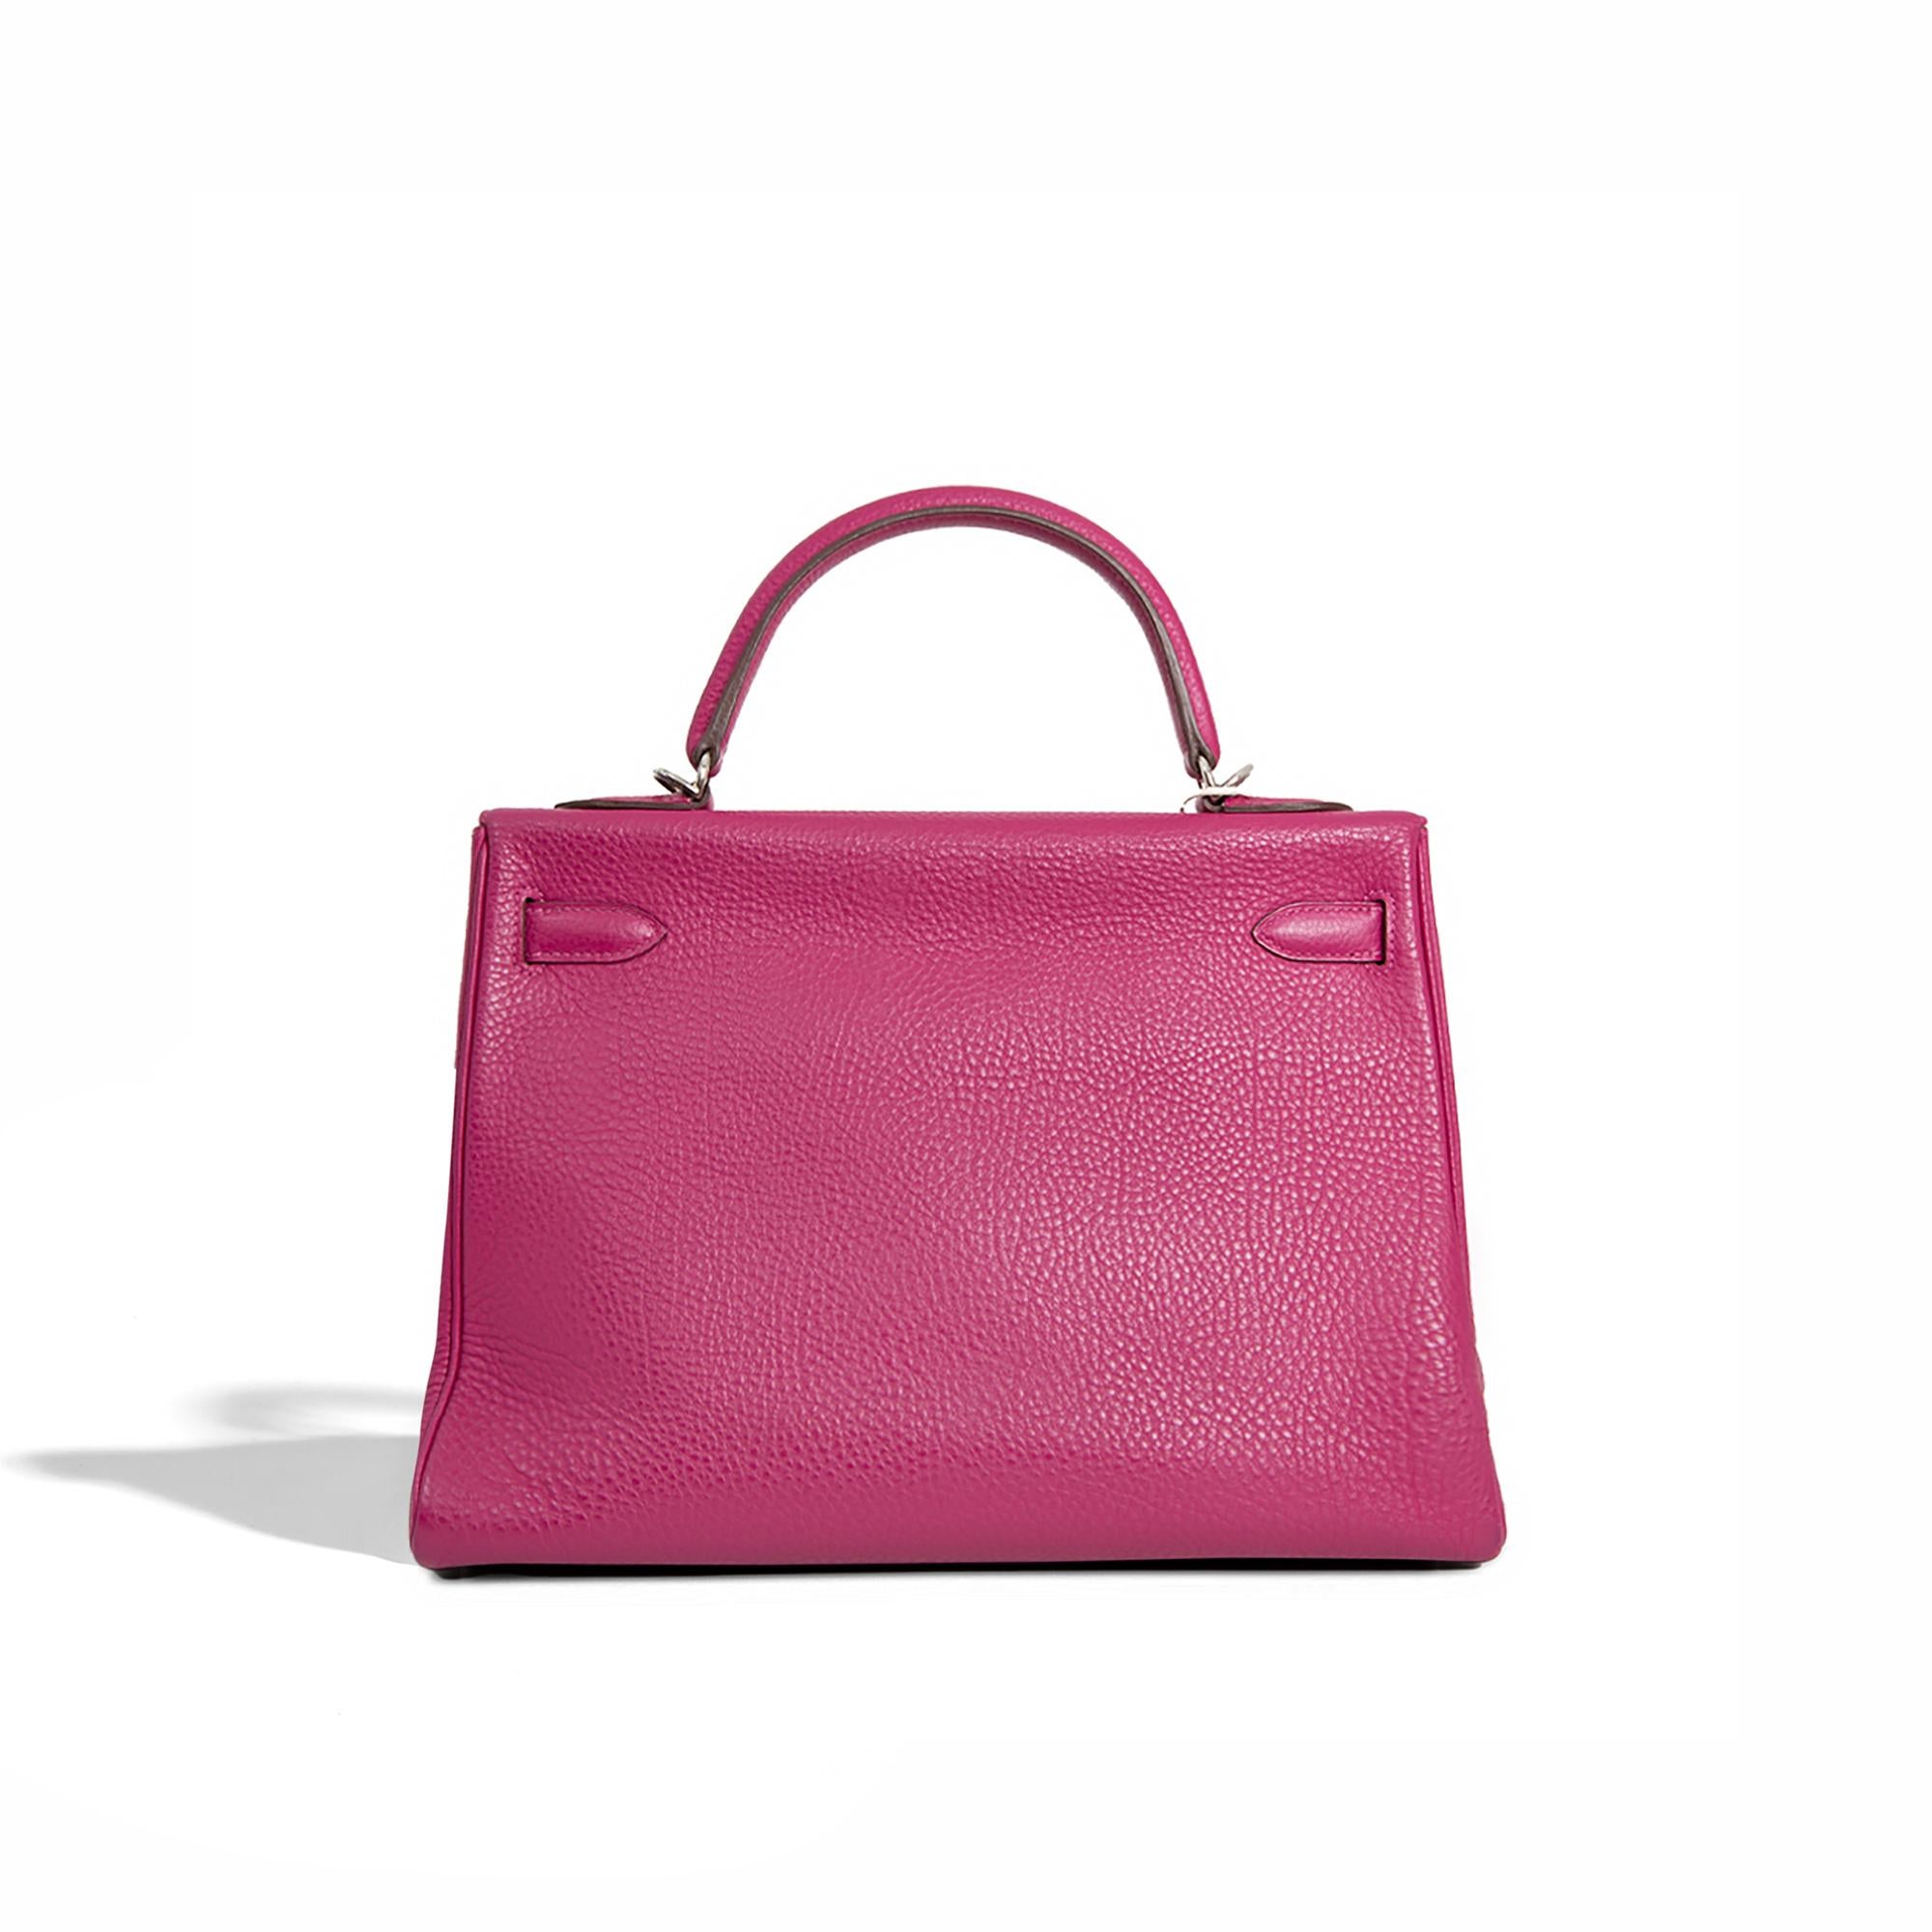 Elevate your wardrobe with this classic Togo PHW Kelly bag by Hermès. Crafted with tosca coloured togo leather, this exquisite piece features palladium hardware and was crafted in 2011 and has been kept in excellent condition. Enhance your style